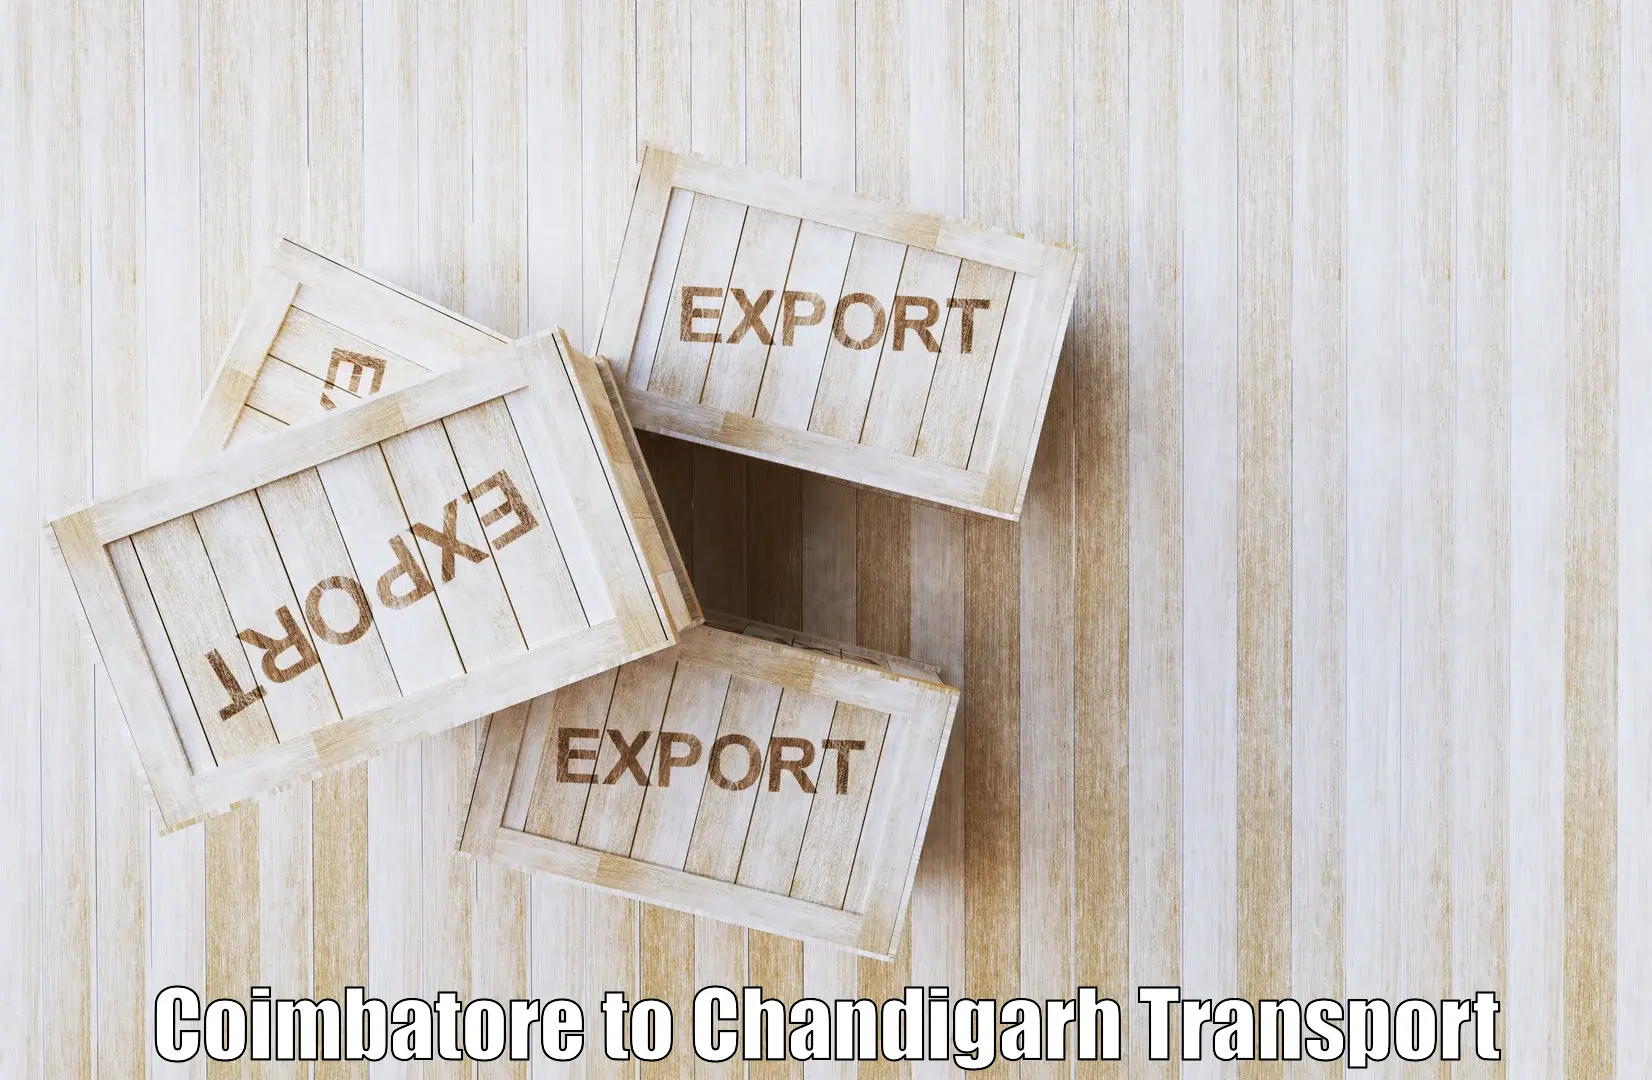 Best transport services in India Coimbatore to Chandigarh